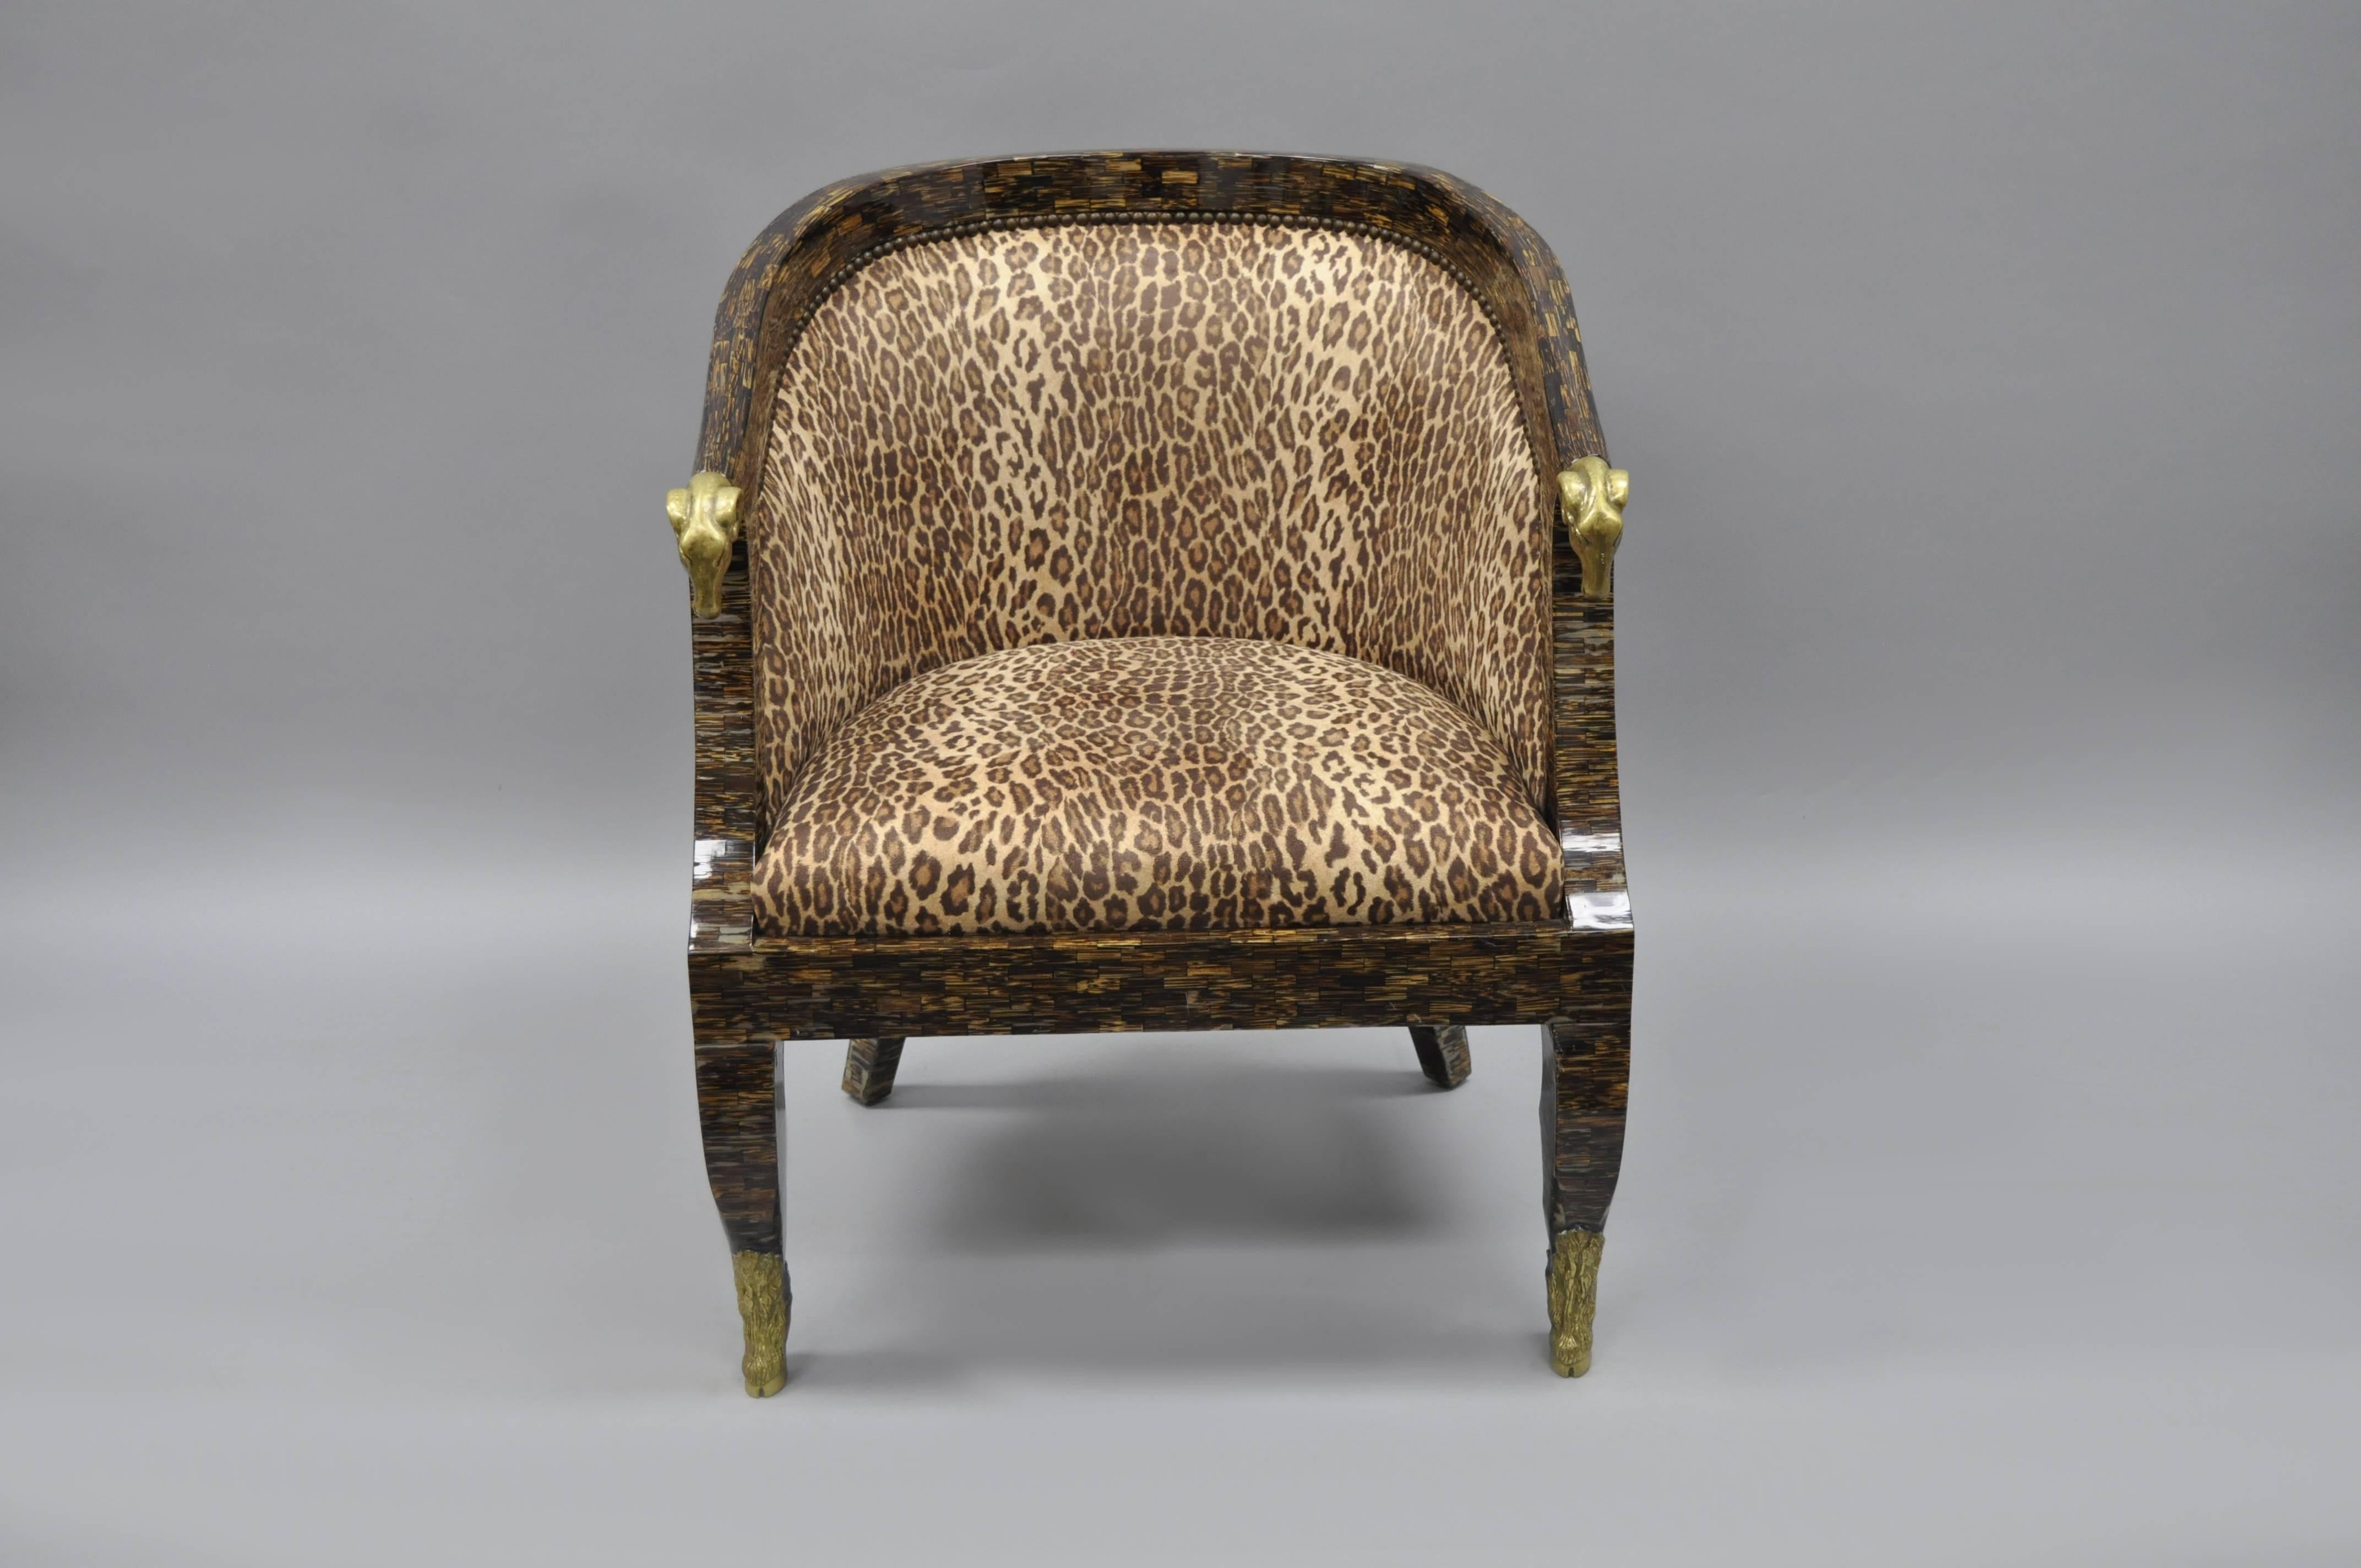 Unique cheetah print horn veneer barrel back club chair in the Regency / French Empire style with bronze ram's heads and hairy hoof foot. Item features finely cast bronze ormolu, shapely legs, cheetah print upholstery, and a faux tortoise color